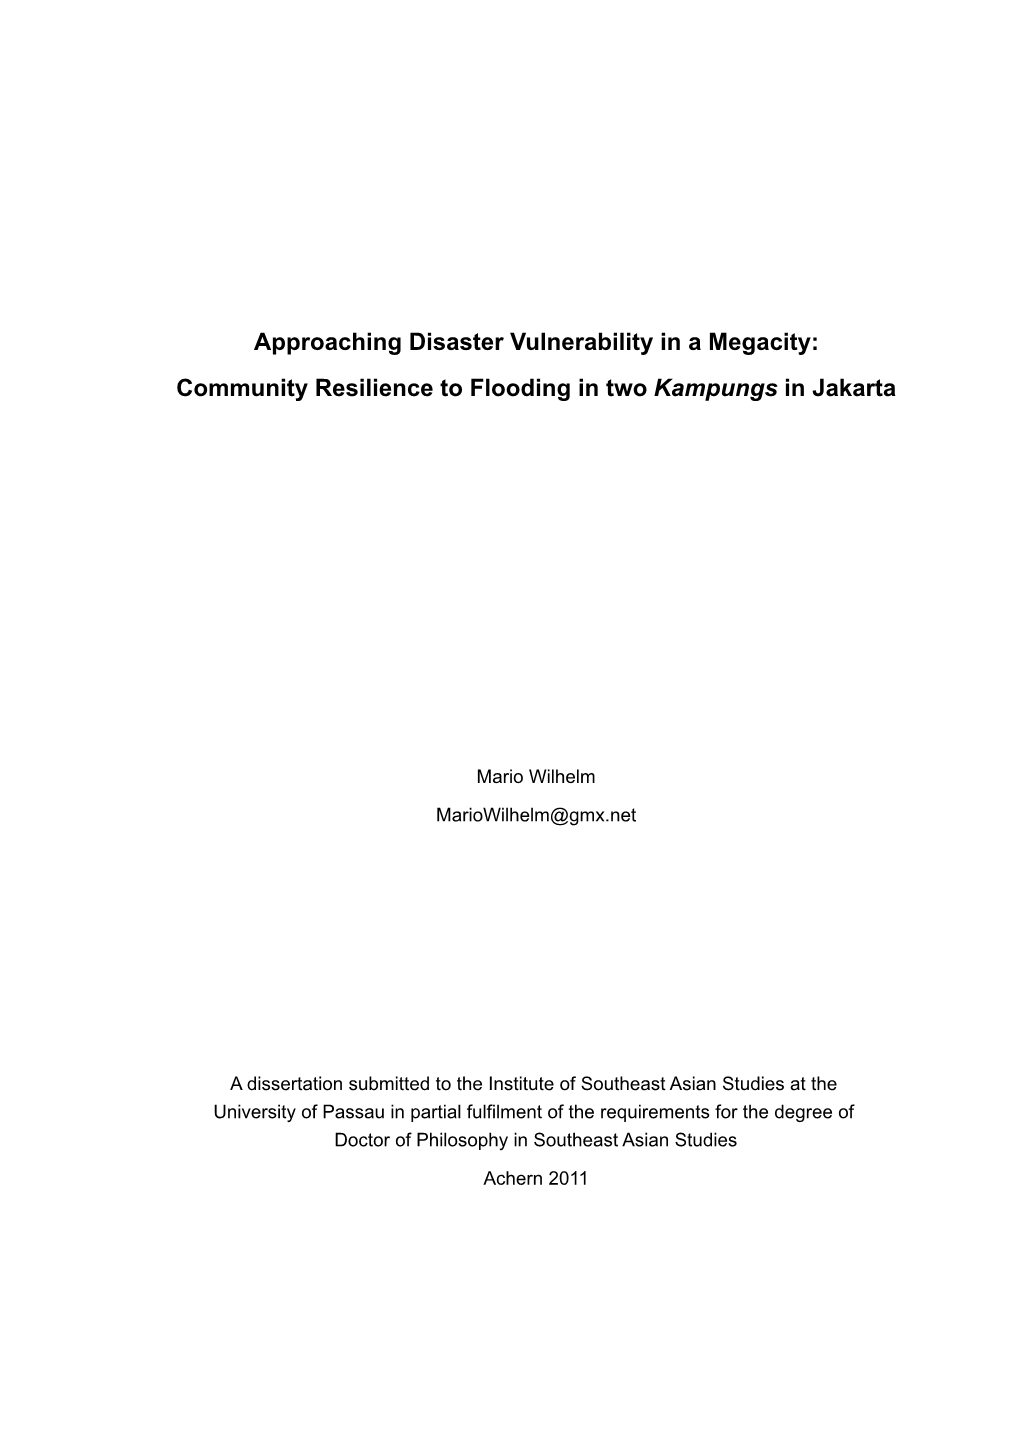 Approaching Disaster Vulnerability in a Megacity: Community Resilience to Flooding in Two Kampungs in Jakarta